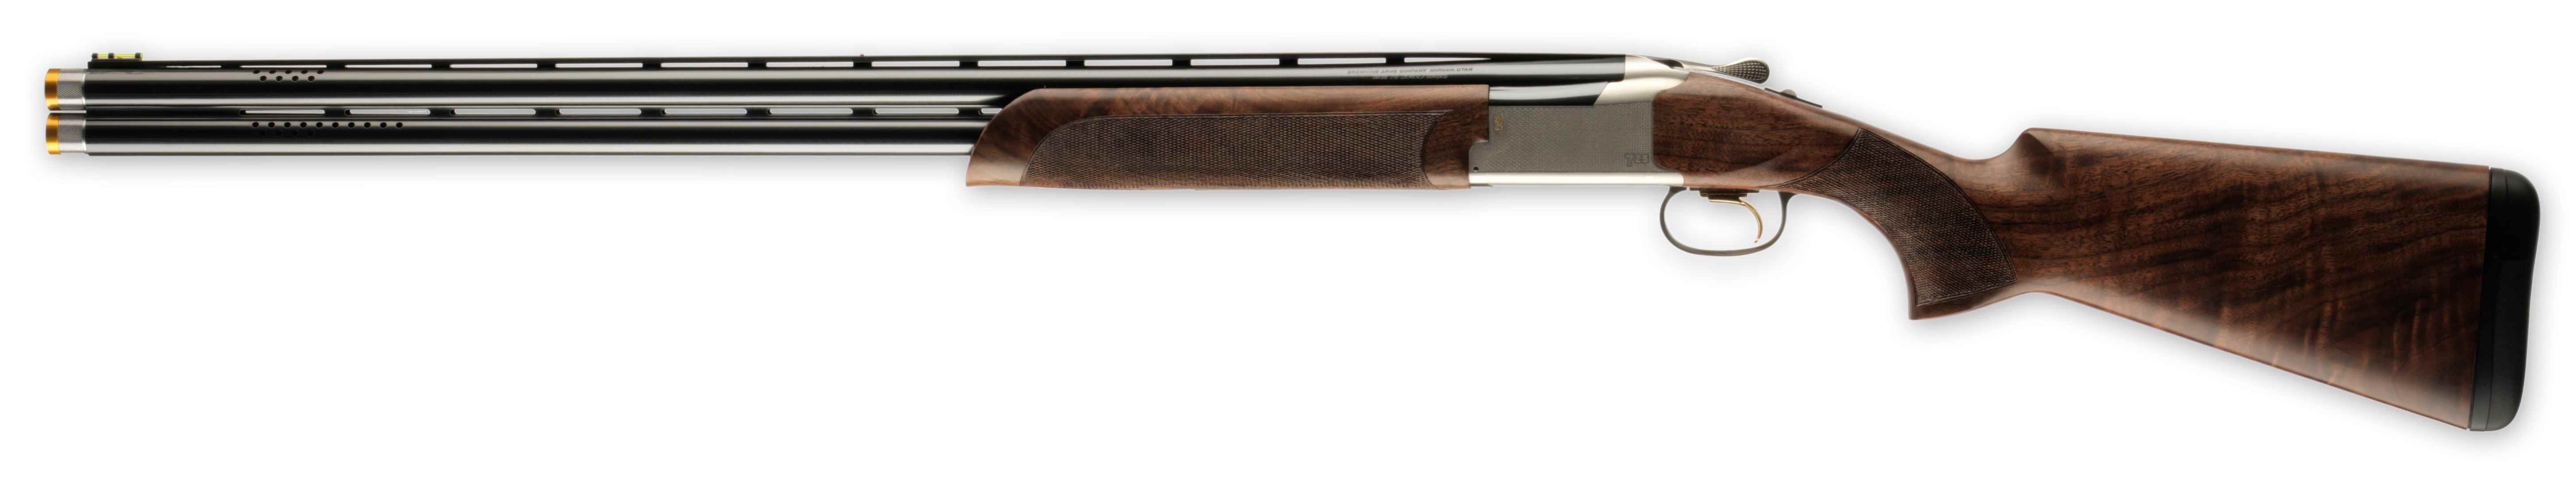 Browning Citori 725 Sporting Left-Hand